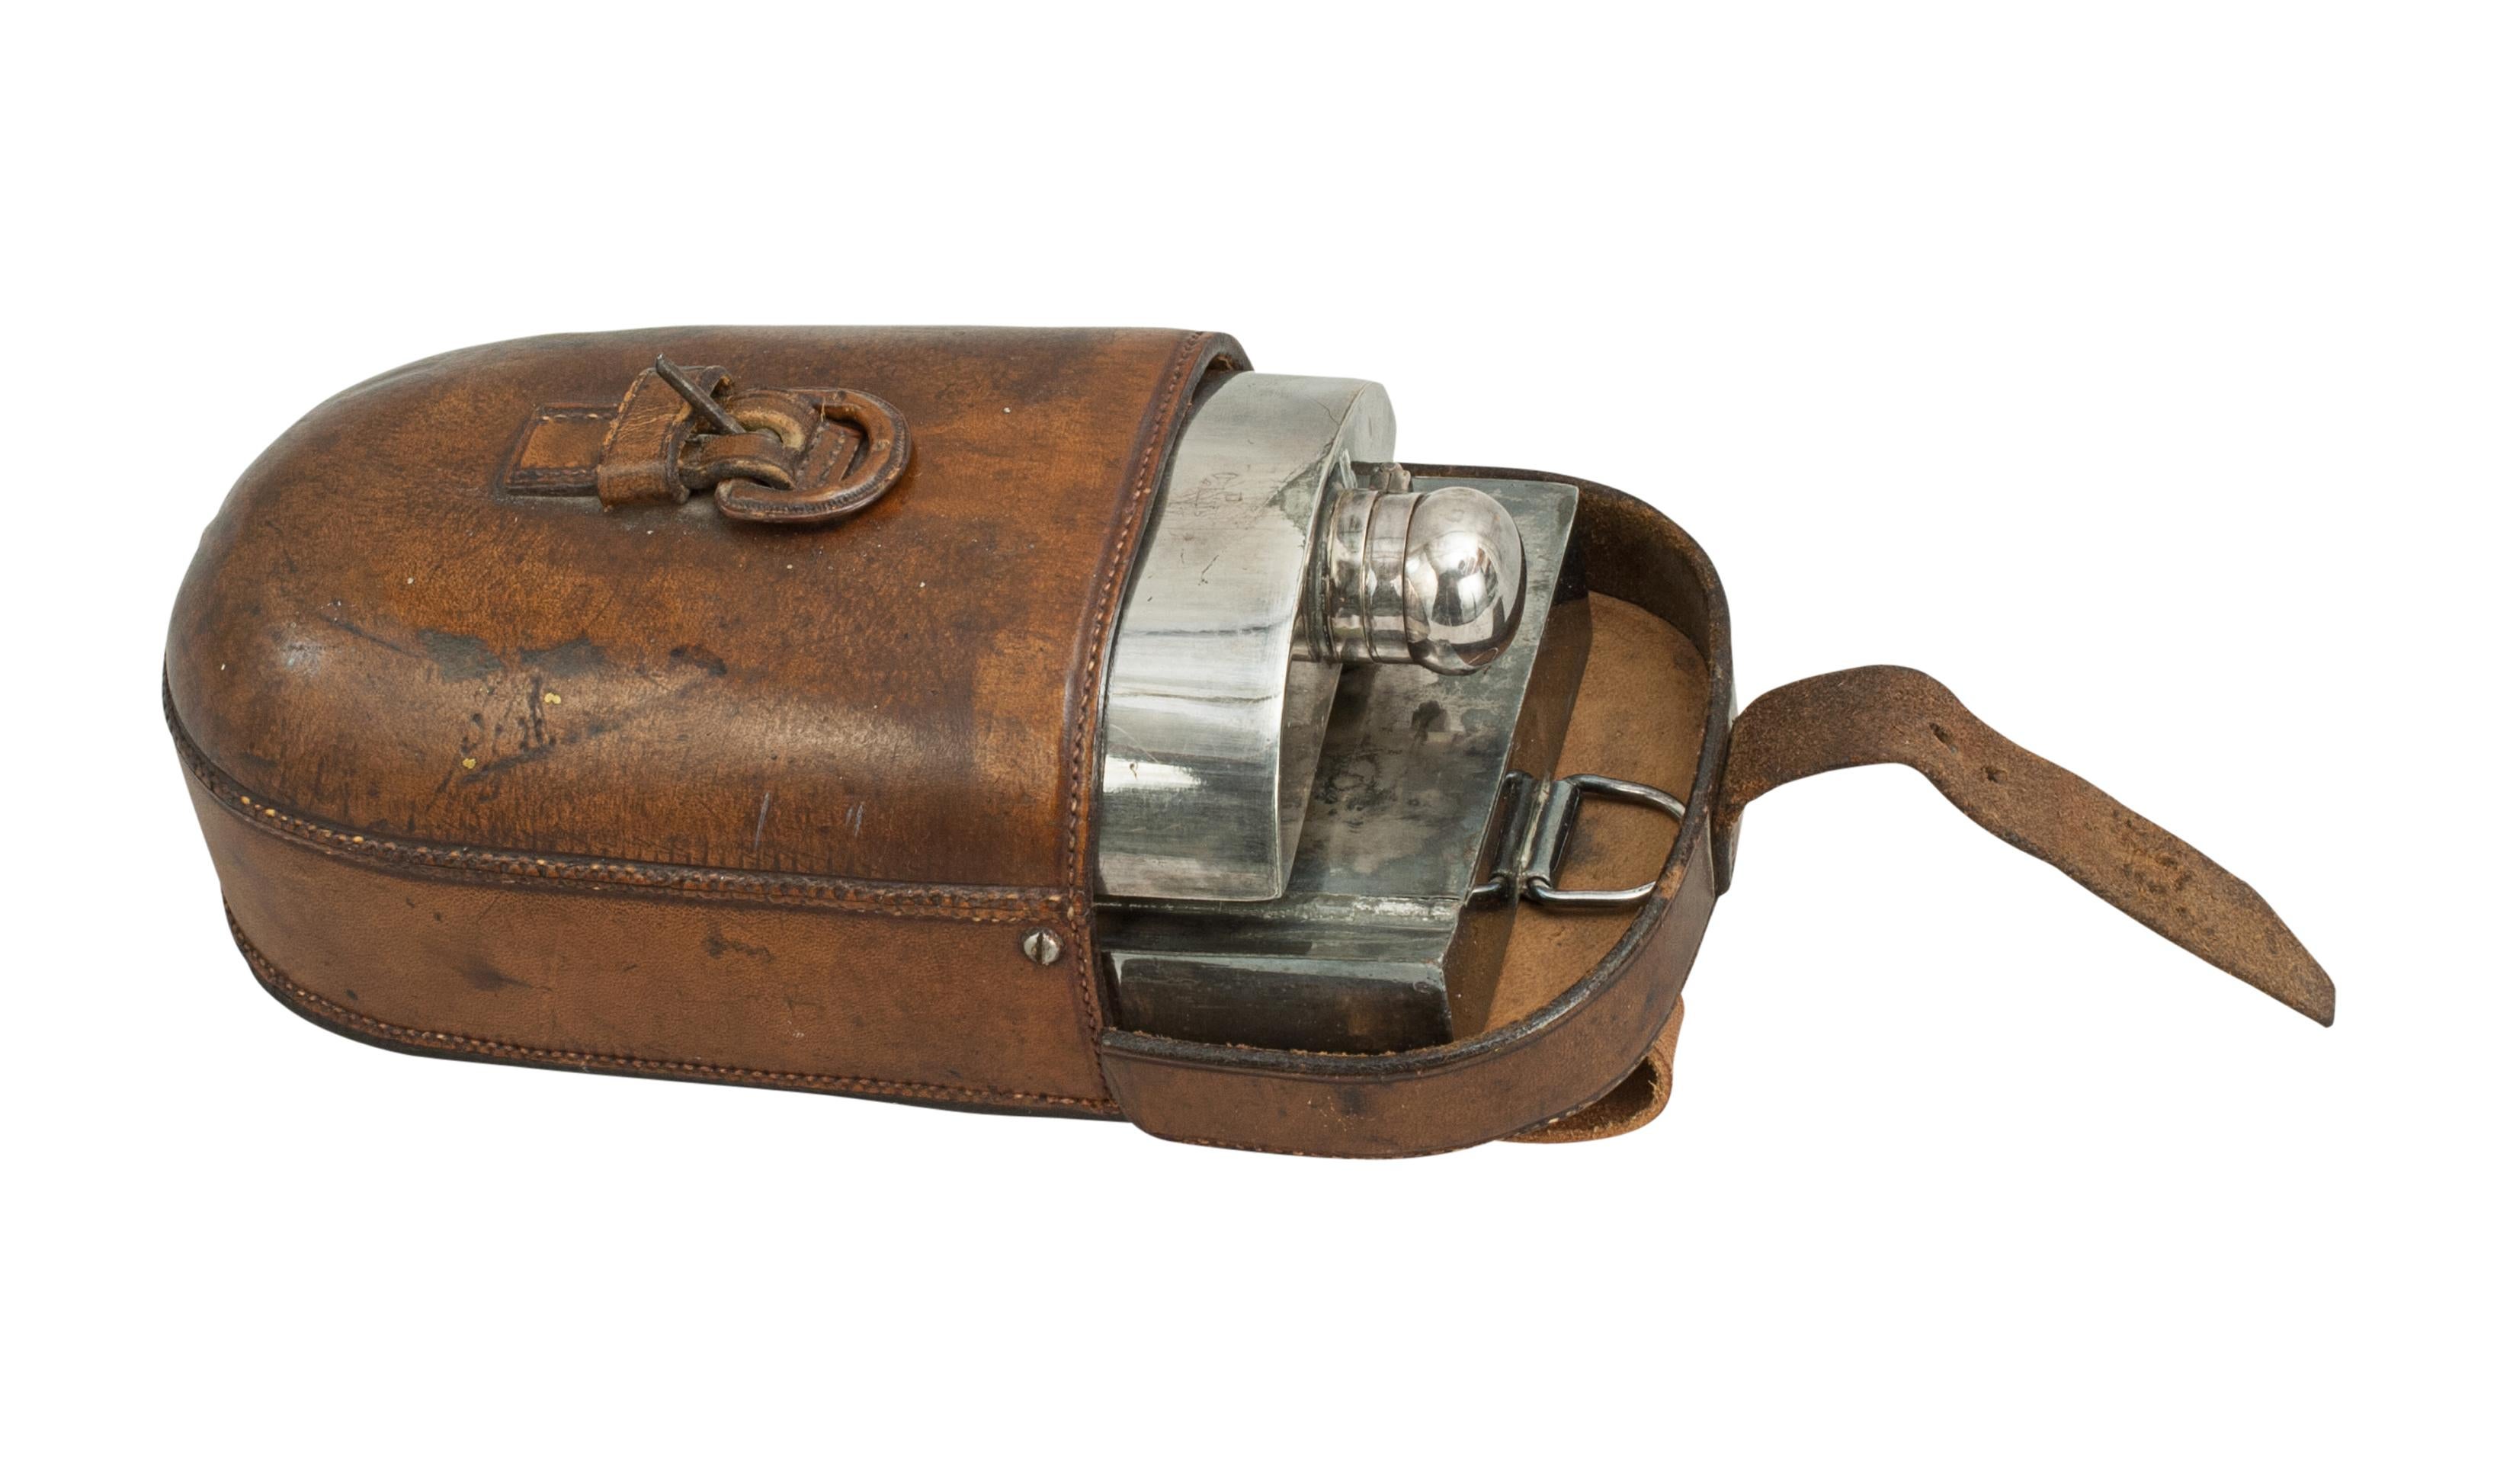 A rare ladies hunting, side-saddle, combined sandwich case and flask in leather case. The 'piggy back' hunt canteen differs from the normal style of side by side as the flask sits on top of the sandwich box instead. The leather with saddle straps